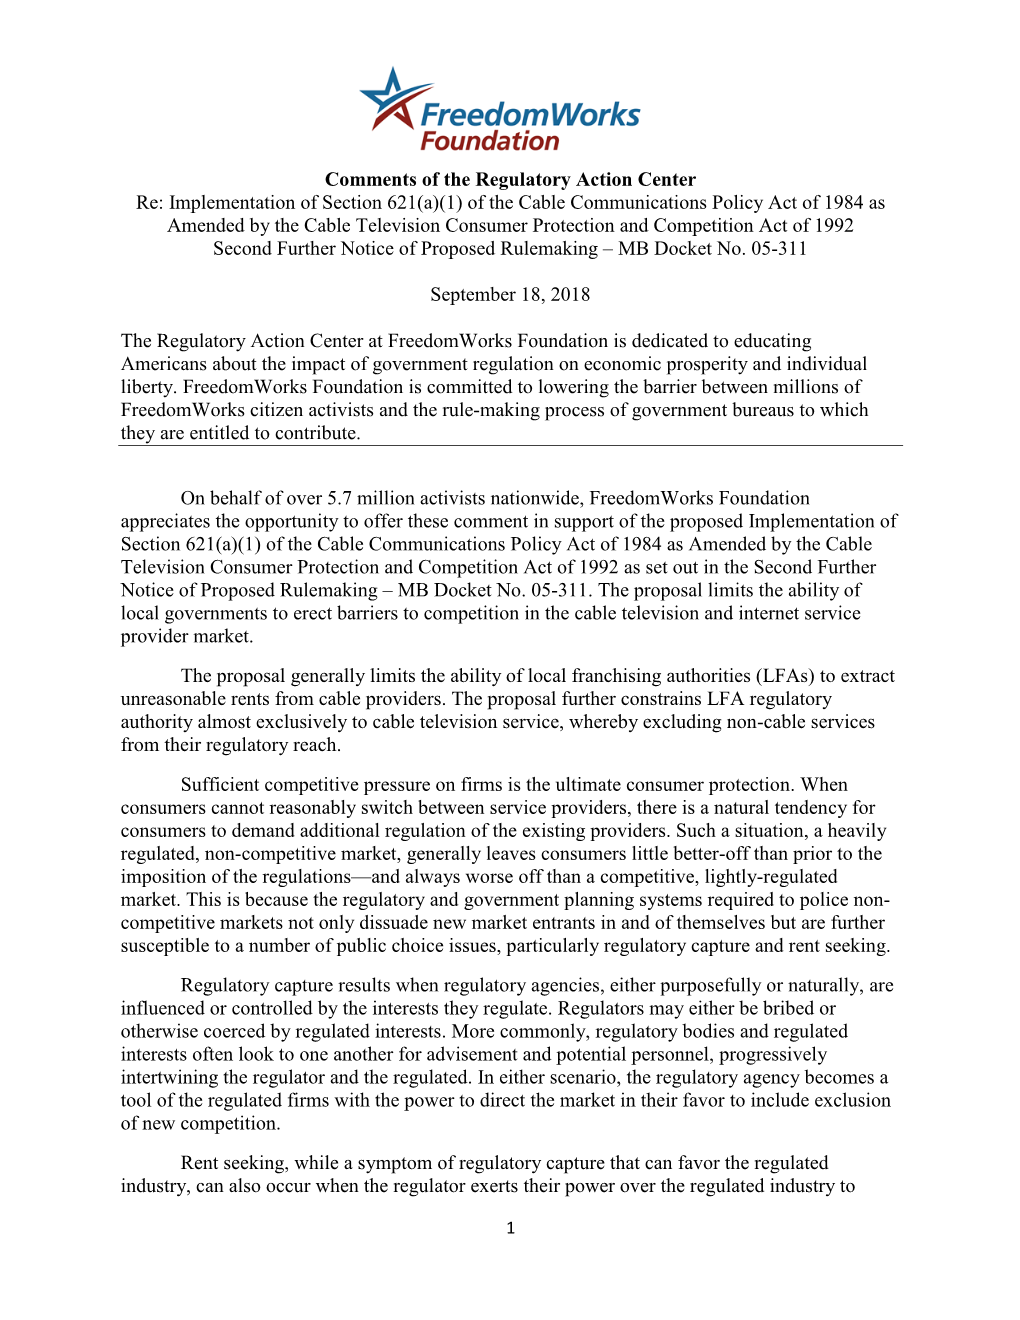 Comments of the Regulatory Action Center Re: Implementation of Section 621(A)(1) of the Cable Communications Policy Act of 1984